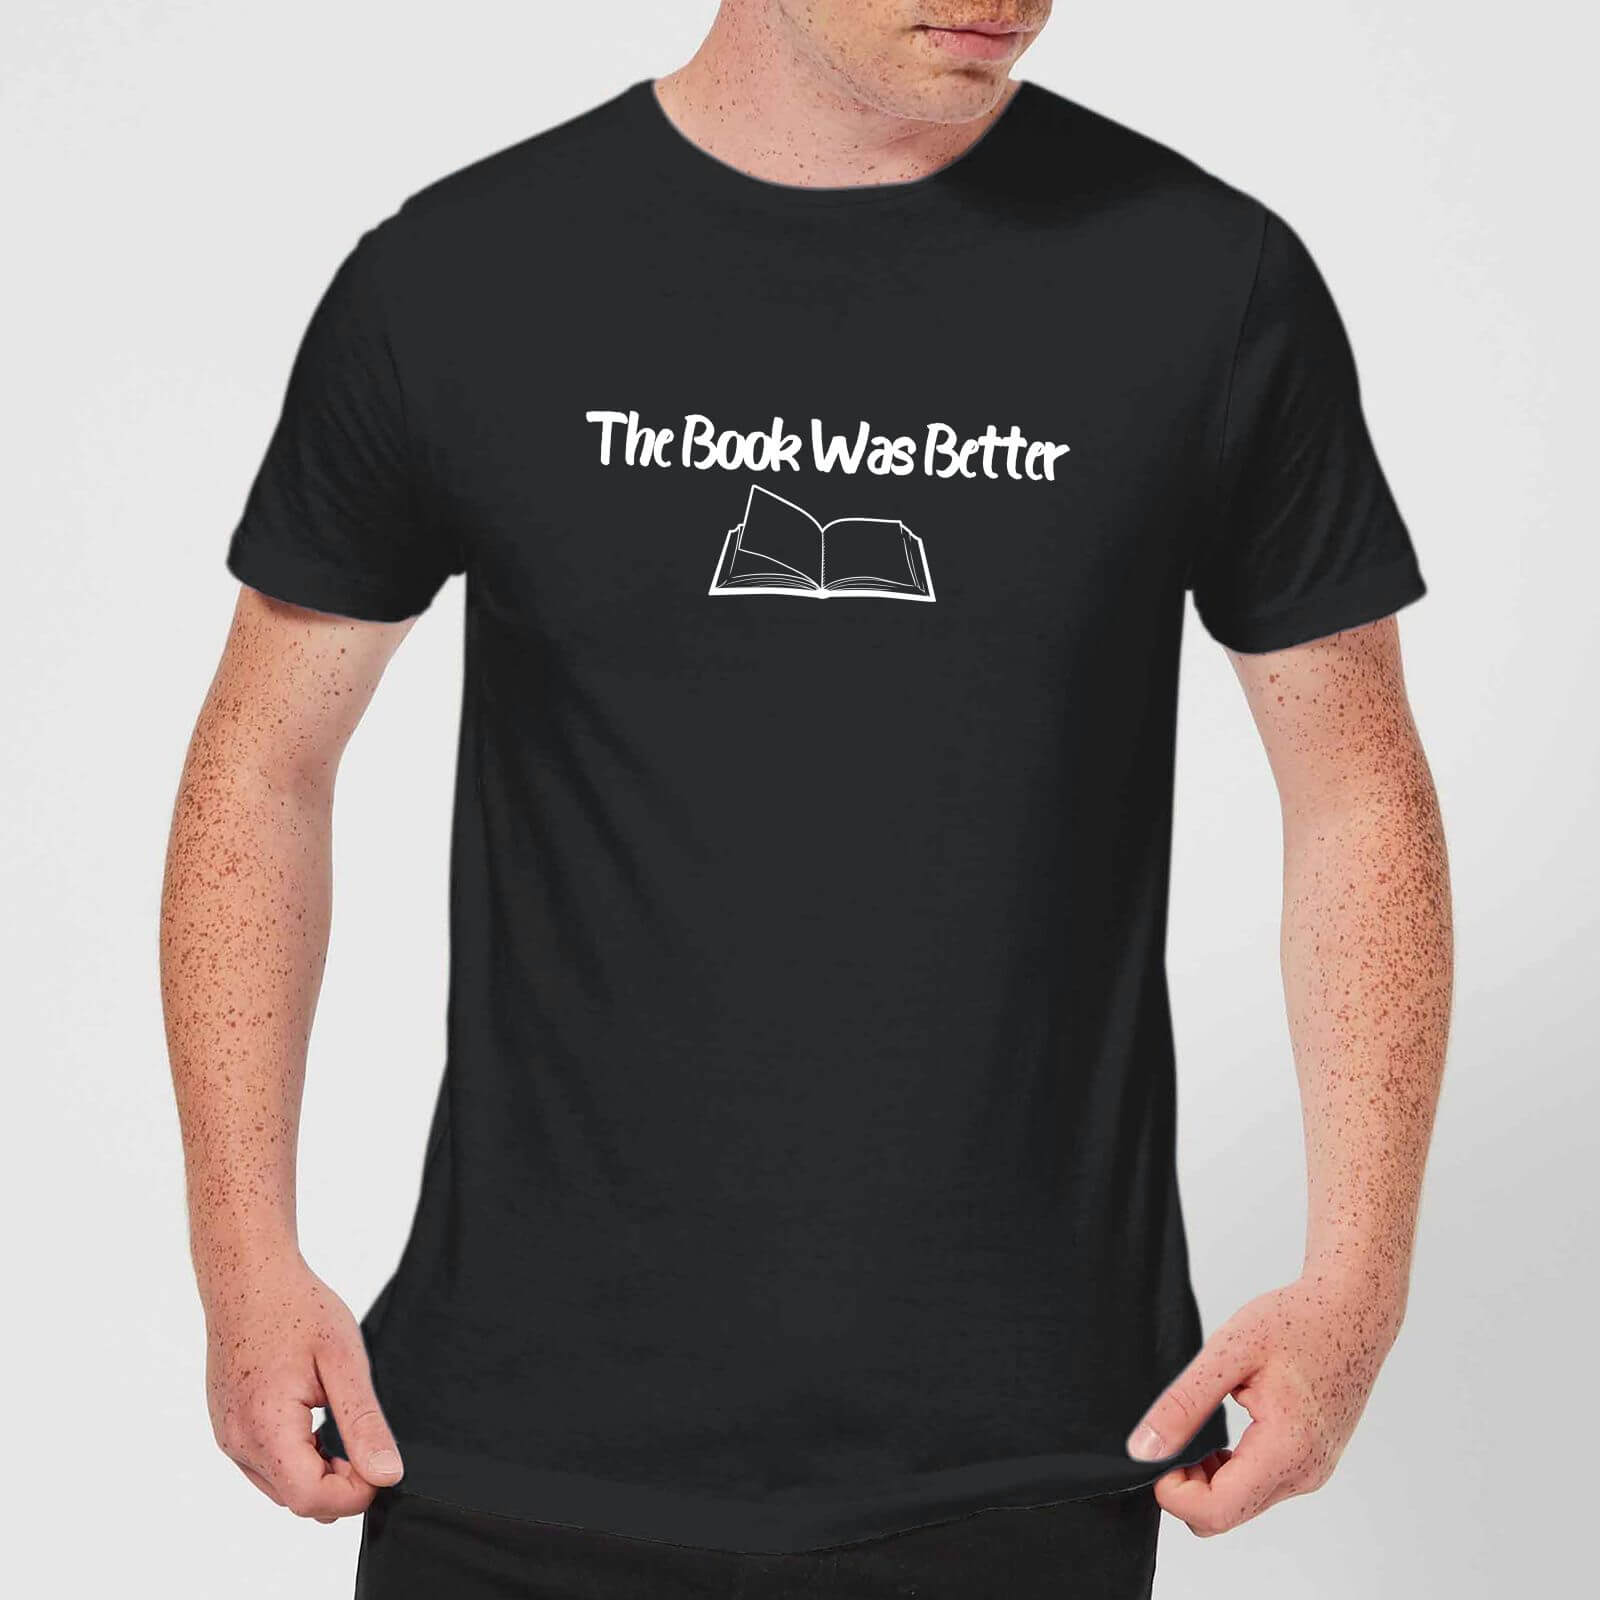 The Book Was Better T-Shirt - Black - S - Black